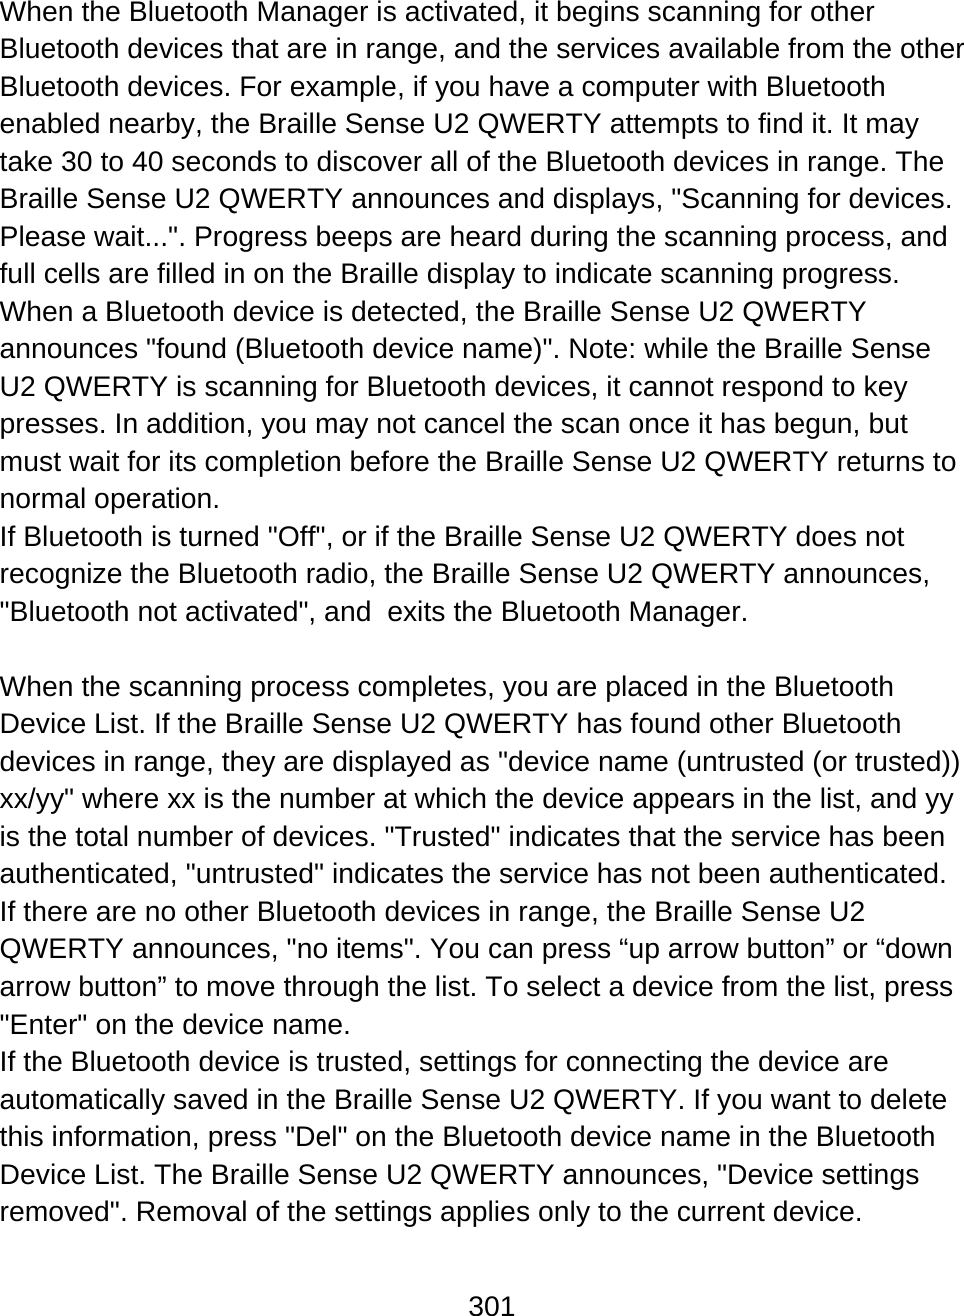 301  When the Bluetooth Manager is activated, it begins scanning for other Bluetooth devices that are in range, and the services available from the other Bluetooth devices. For example, if you have a computer with Bluetooth enabled nearby, the Braille Sense U2 QWERTY attempts to find it. It may take 30 to 40 seconds to discover all of the Bluetooth devices in range. The Braille Sense U2 QWERTY announces and displays, &quot;Scanning for devices. Please wait...&quot;. Progress beeps are heard during the scanning process, and full cells are filled in on the Braille display to indicate scanning progress.  When a Bluetooth device is detected, the Braille Sense U2 QWERTY announces &quot;found (Bluetooth device name)&quot;. Note: while the Braille Sense U2 QWERTY is scanning for Bluetooth devices, it cannot respond to key presses. In addition, you may not cancel the scan once it has begun, but must wait for its completion before the Braille Sense U2 QWERTY returns to normal operation.   If Bluetooth is turned &quot;Off&quot;, or if the Braille Sense U2 QWERTY does not recognize the Bluetooth radio, the Braille Sense U2 QWERTY announces, &quot;Bluetooth not activated&quot;, and  exits the Bluetooth Manager.  When the scanning process completes, you are placed in the Bluetooth Device List. If the Braille Sense U2 QWERTY has found other Bluetooth devices in range, they are displayed as &quot;device name (untrusted (or trusted)) xx/yy&quot; where xx is the number at which the device appears in the list, and yy is the total number of devices. &quot;Trusted&quot; indicates that the service has been authenticated, &quot;untrusted&quot; indicates the service has not been authenticated. If there are no other Bluetooth devices in range, the Braille Sense U2 QWERTY announces, &quot;no items&quot;. You can press “up arrow button” or “down arrow button” to move through the list. To select a device from the list, press &quot;Enter&quot; on the device name. If the Bluetooth device is trusted, settings for connecting the device are automatically saved in the Braille Sense U2 QWERTY. If you want to delete this information, press &quot;Del&quot; on the Bluetooth device name in the Bluetooth Device List. The Braille Sense U2 QWERTY announces, &quot;Device settings removed&quot;. Removal of the settings applies only to the current device. 